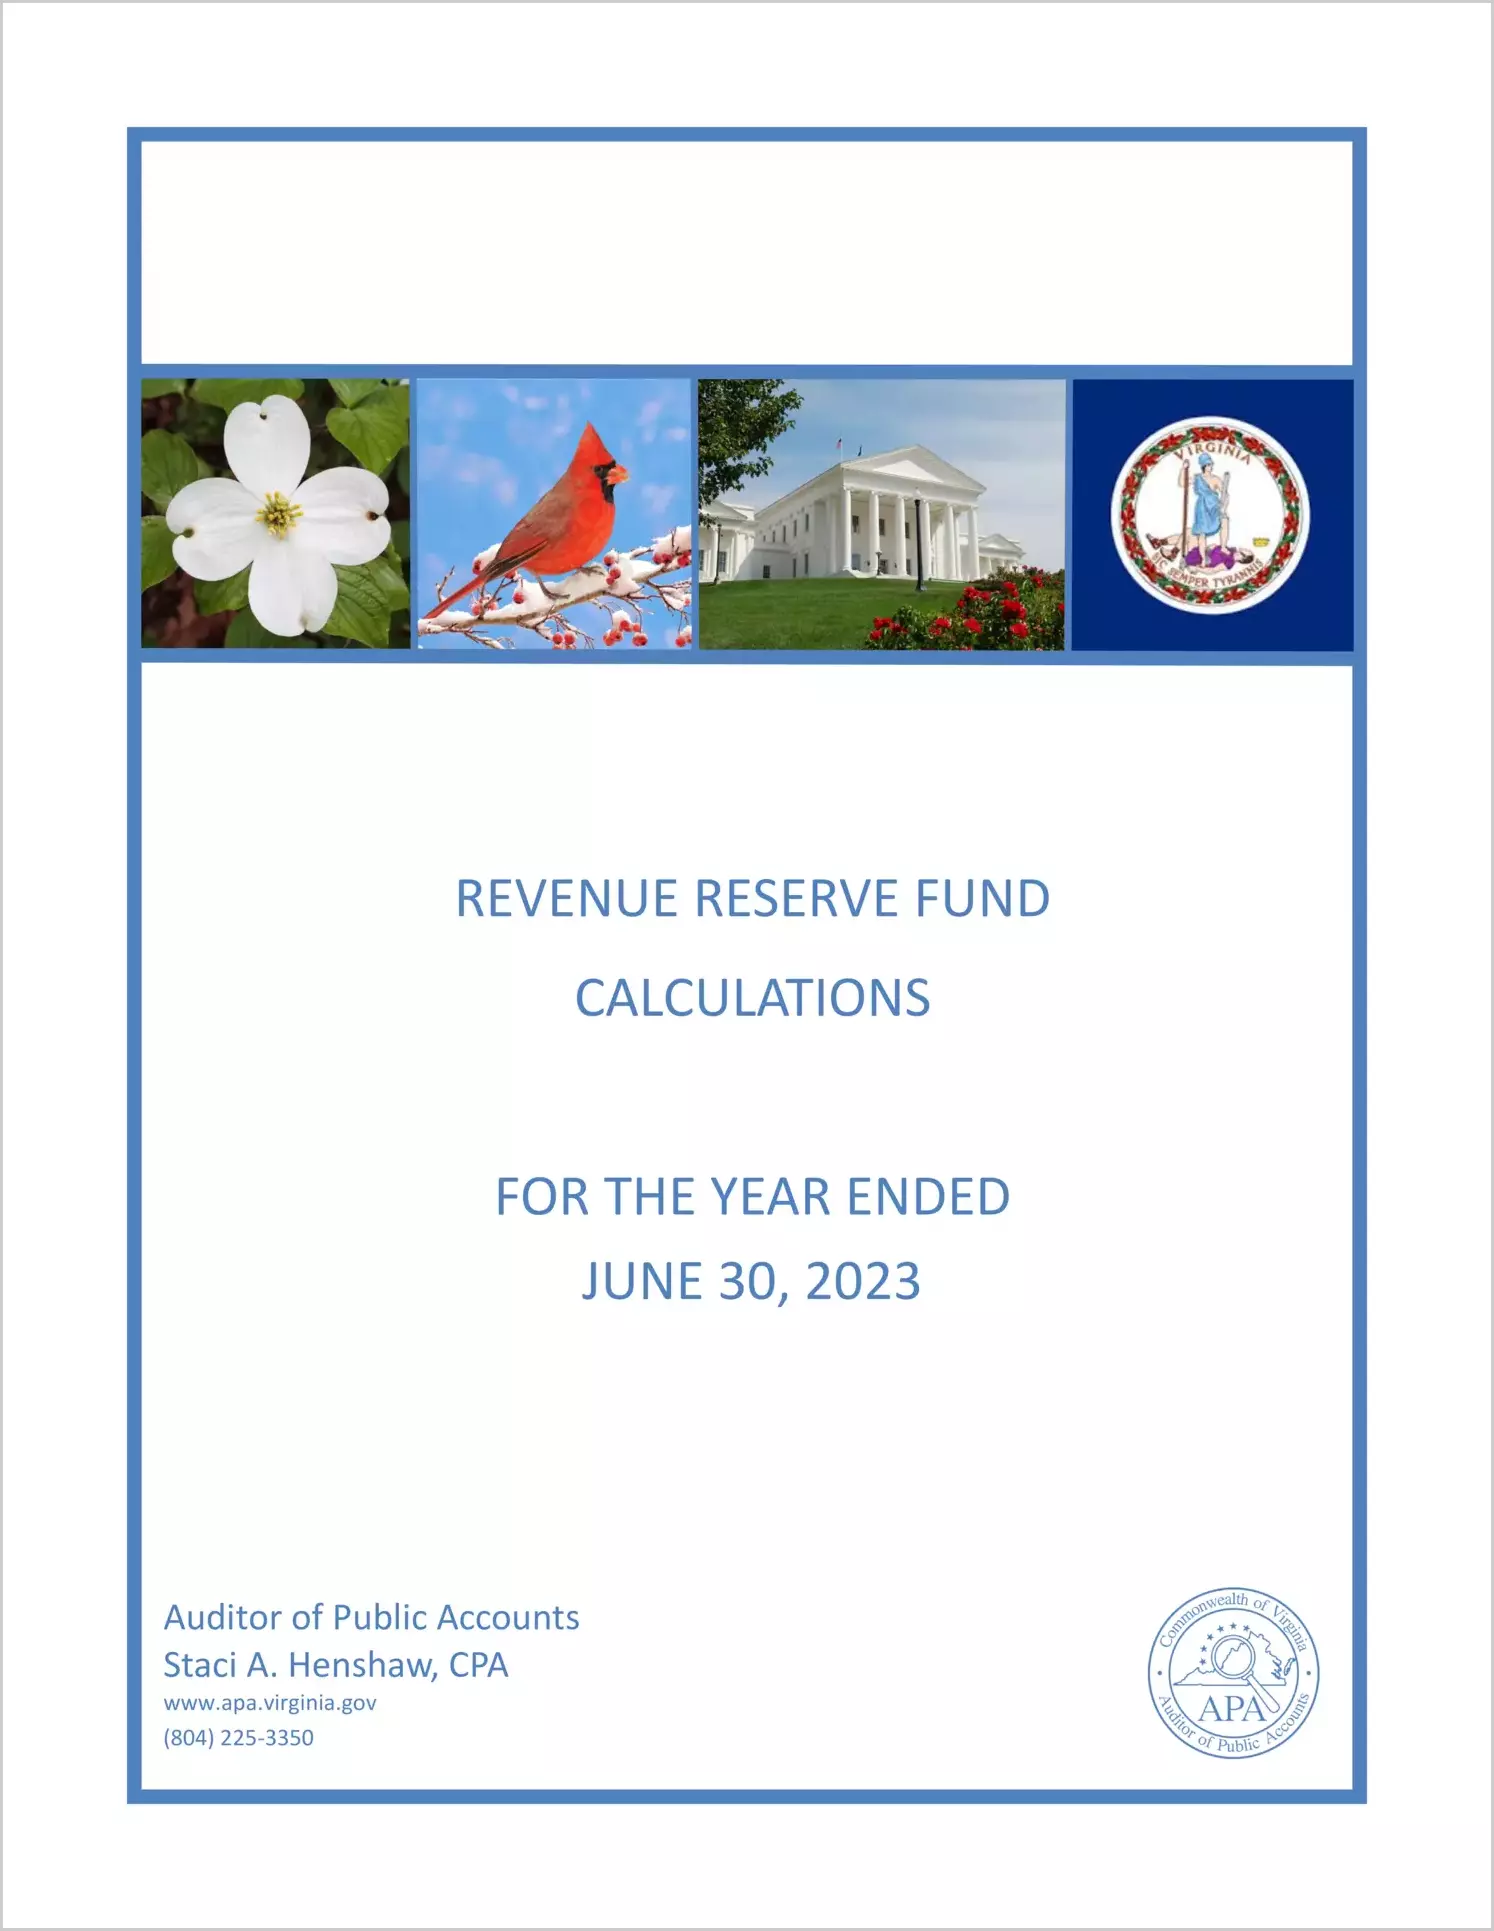 Revenue Reserve Fund Calculations for the year ended June 30, 2023